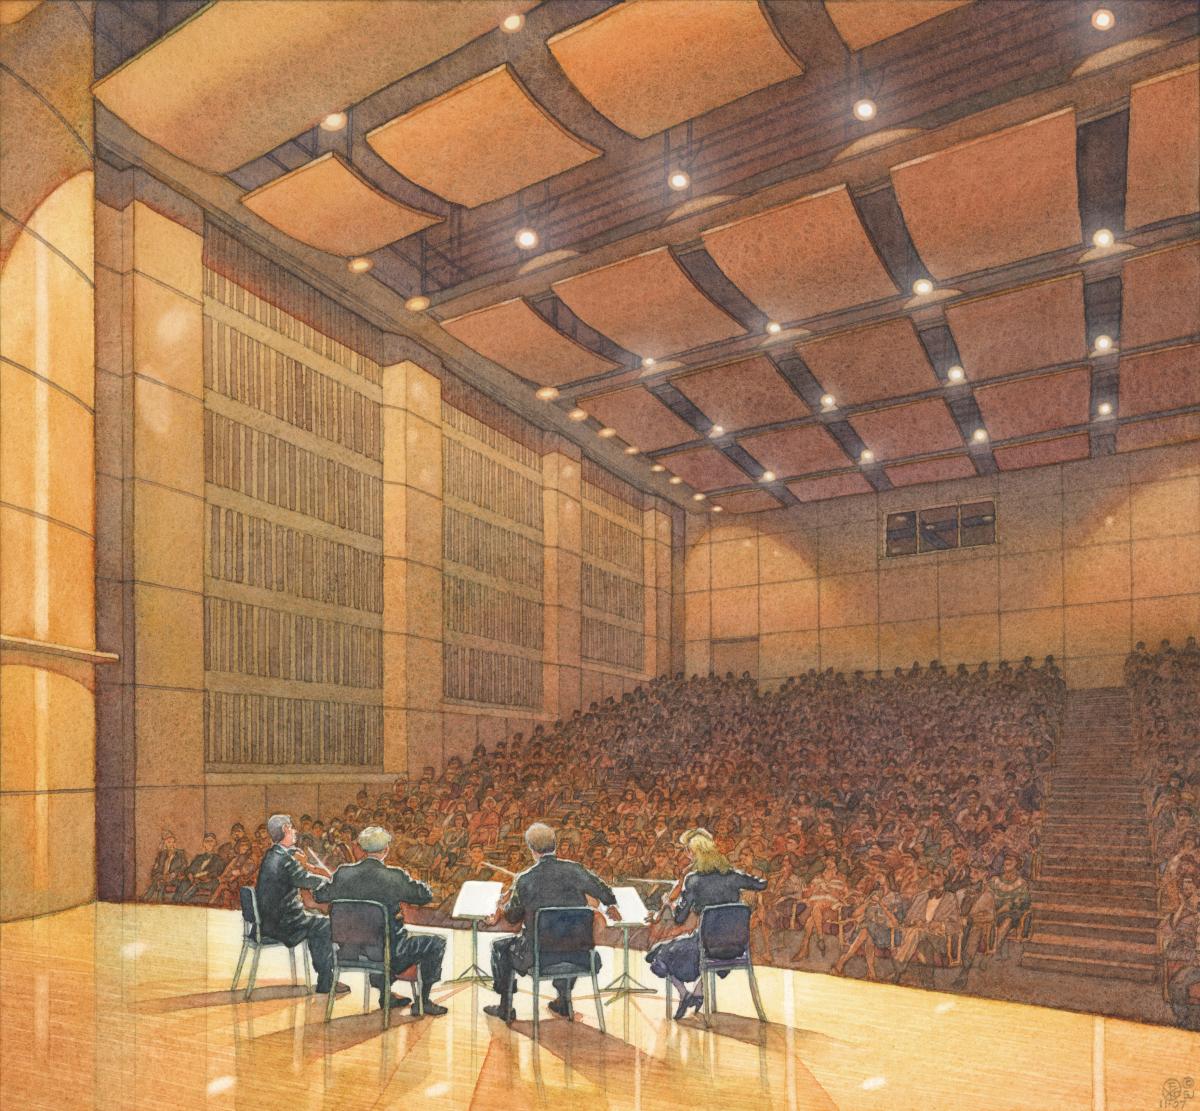 Quartet on Stage - watercolor architectural illustration interior by FrankCostantino